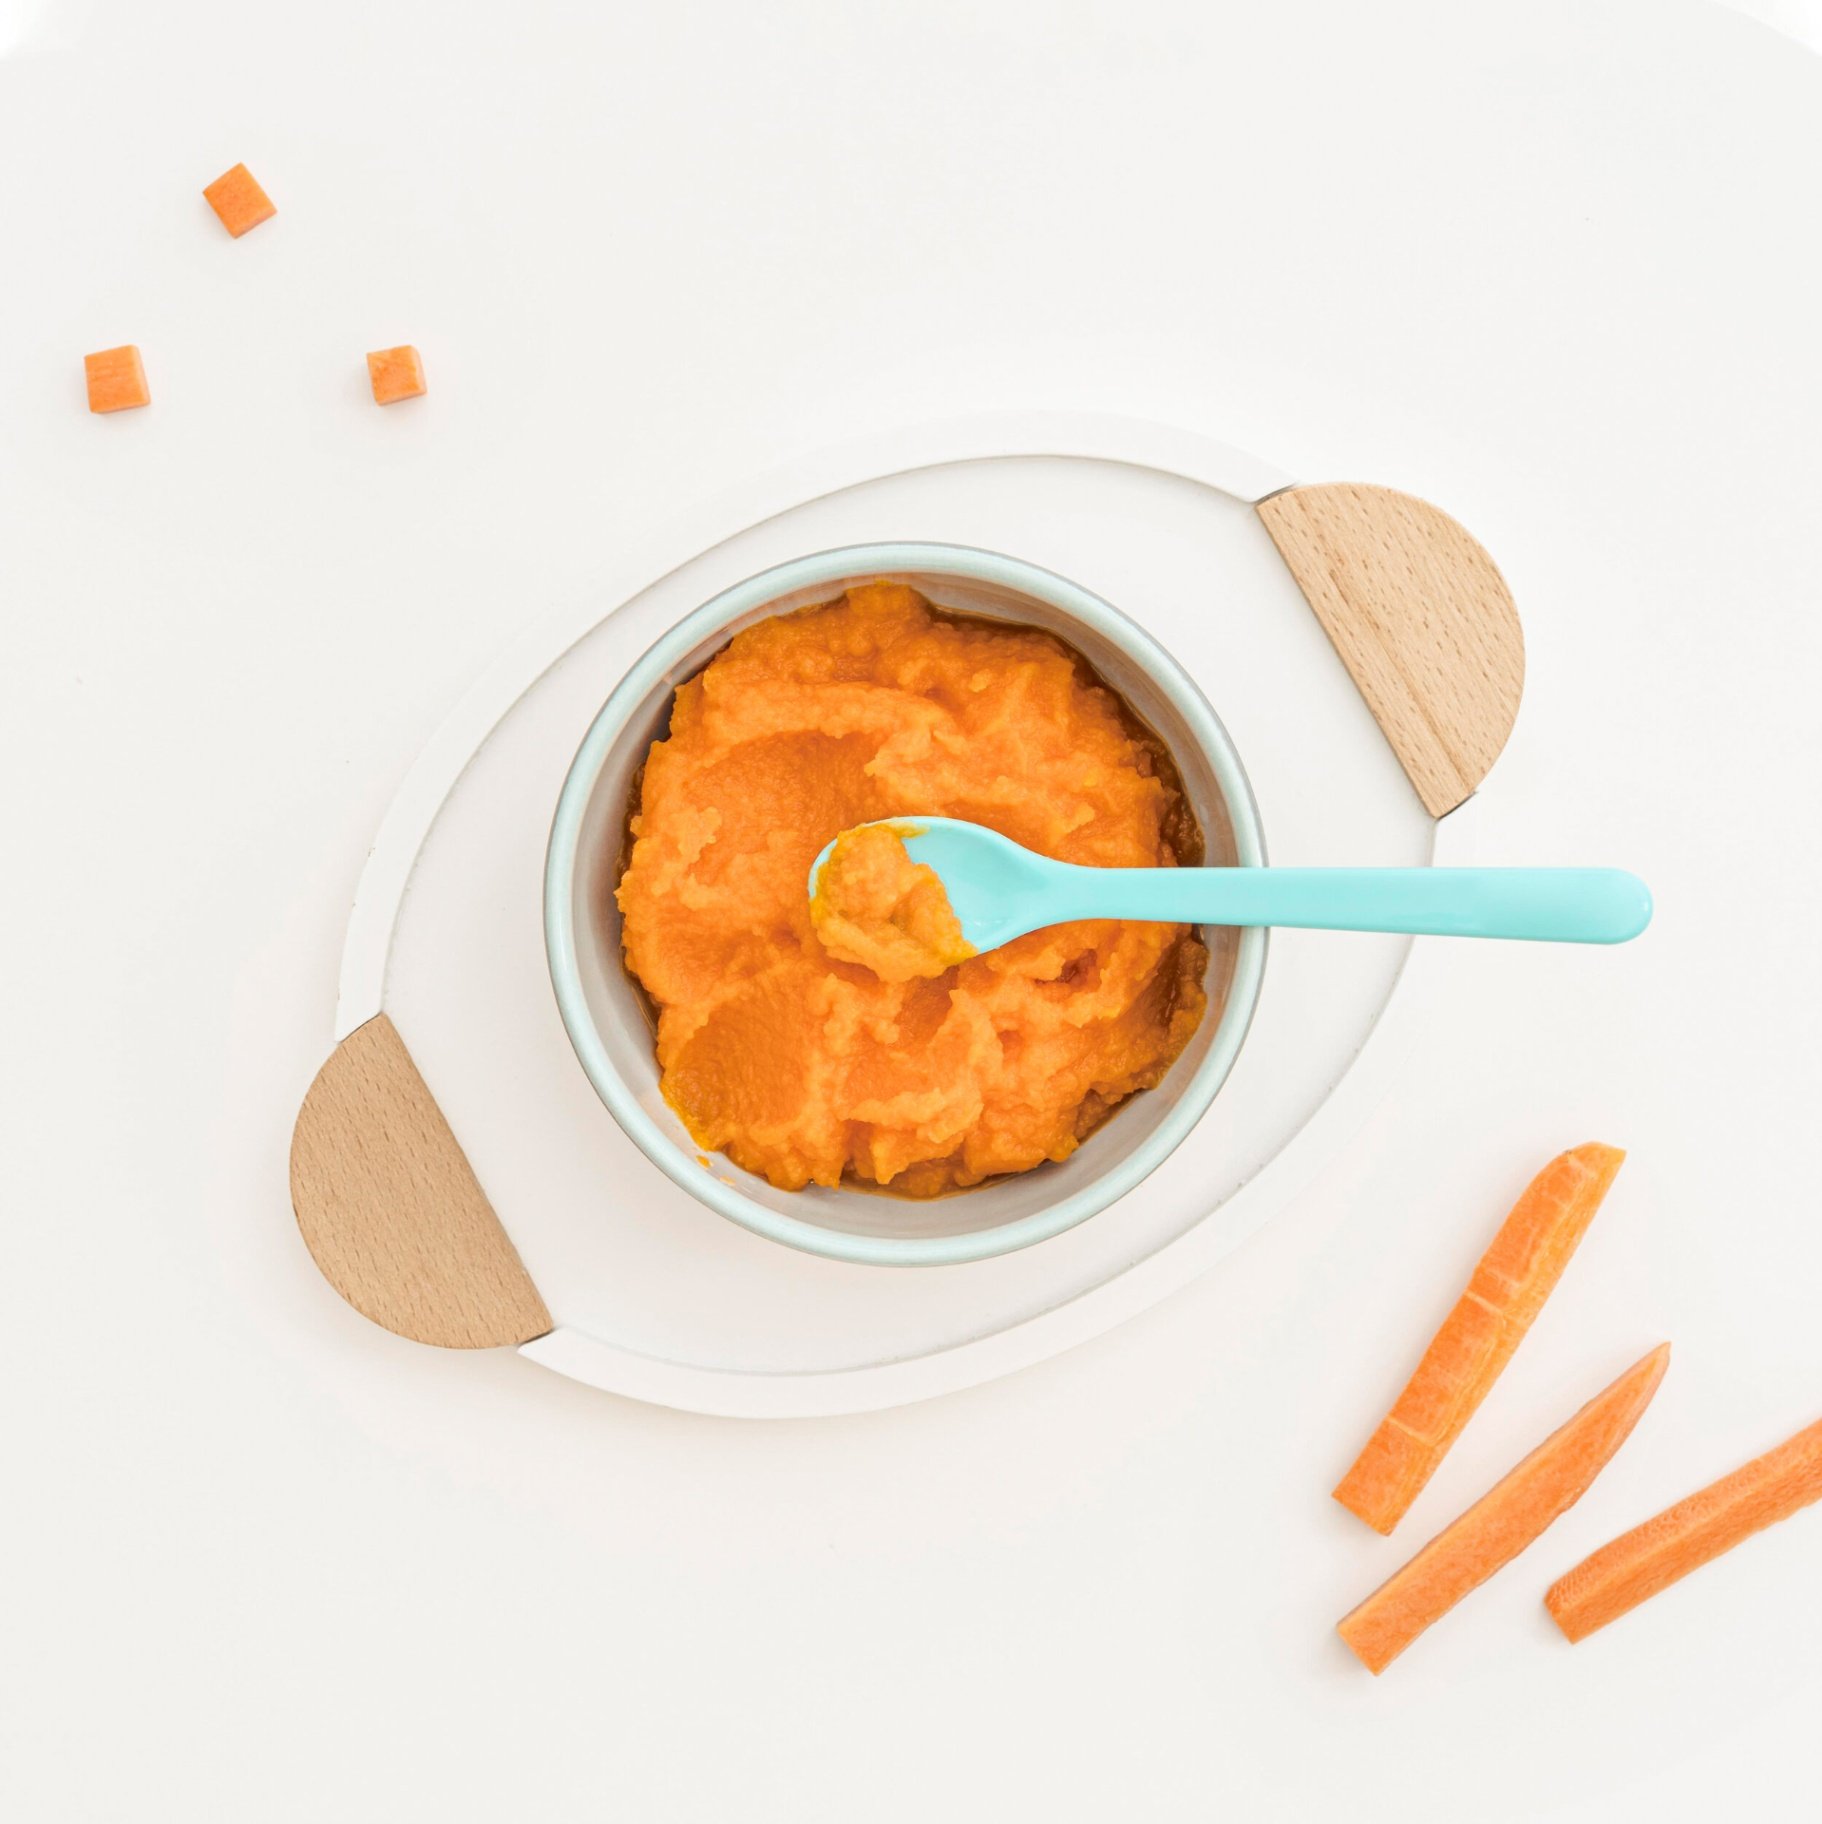 Top 10 Baby Food Recipes - Check Them Out